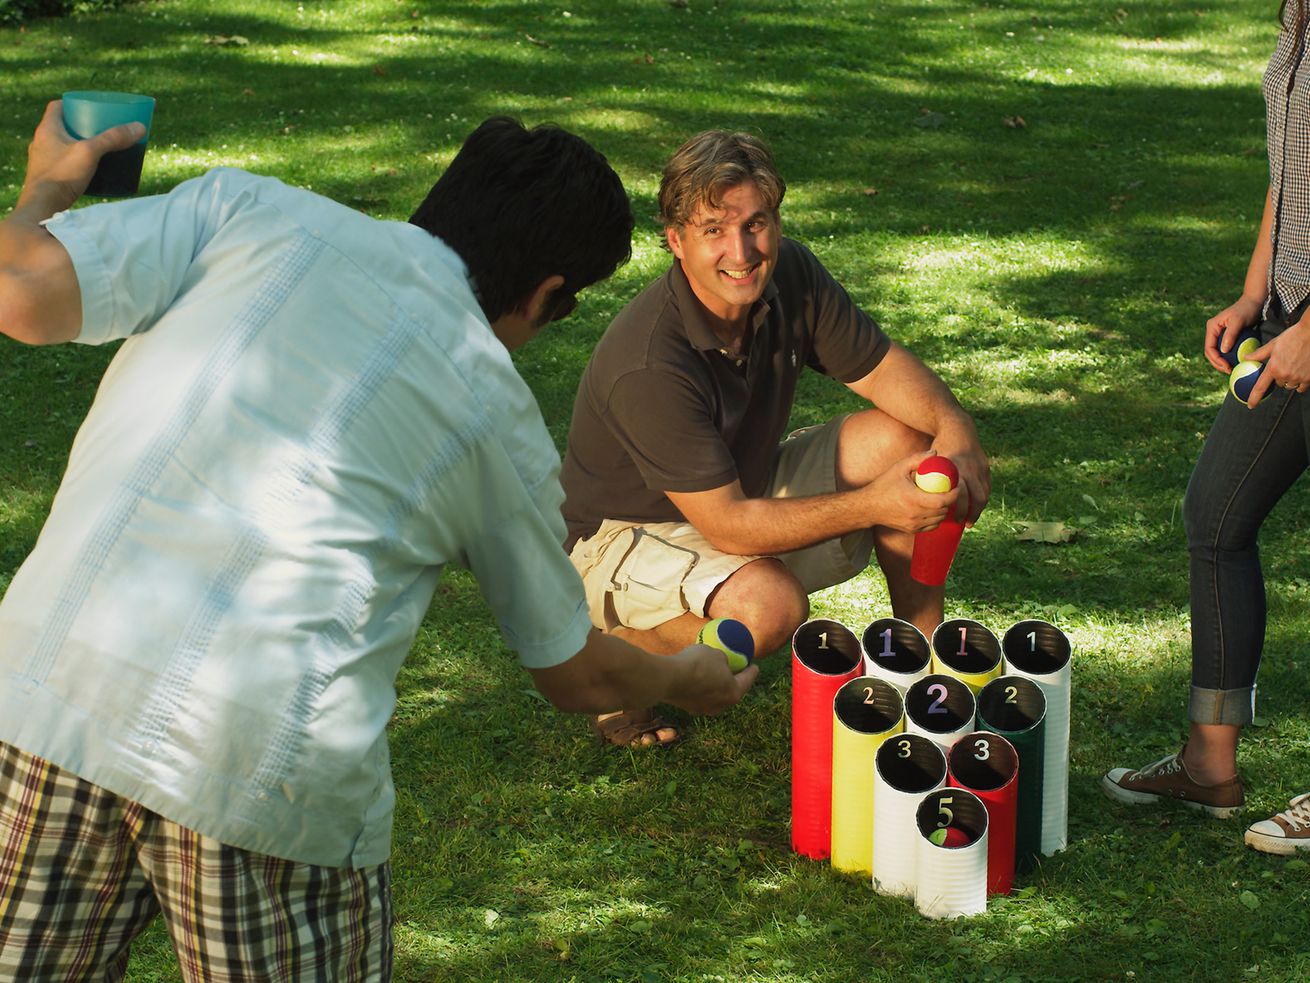 Group of friends playing a pipe ball lawn game